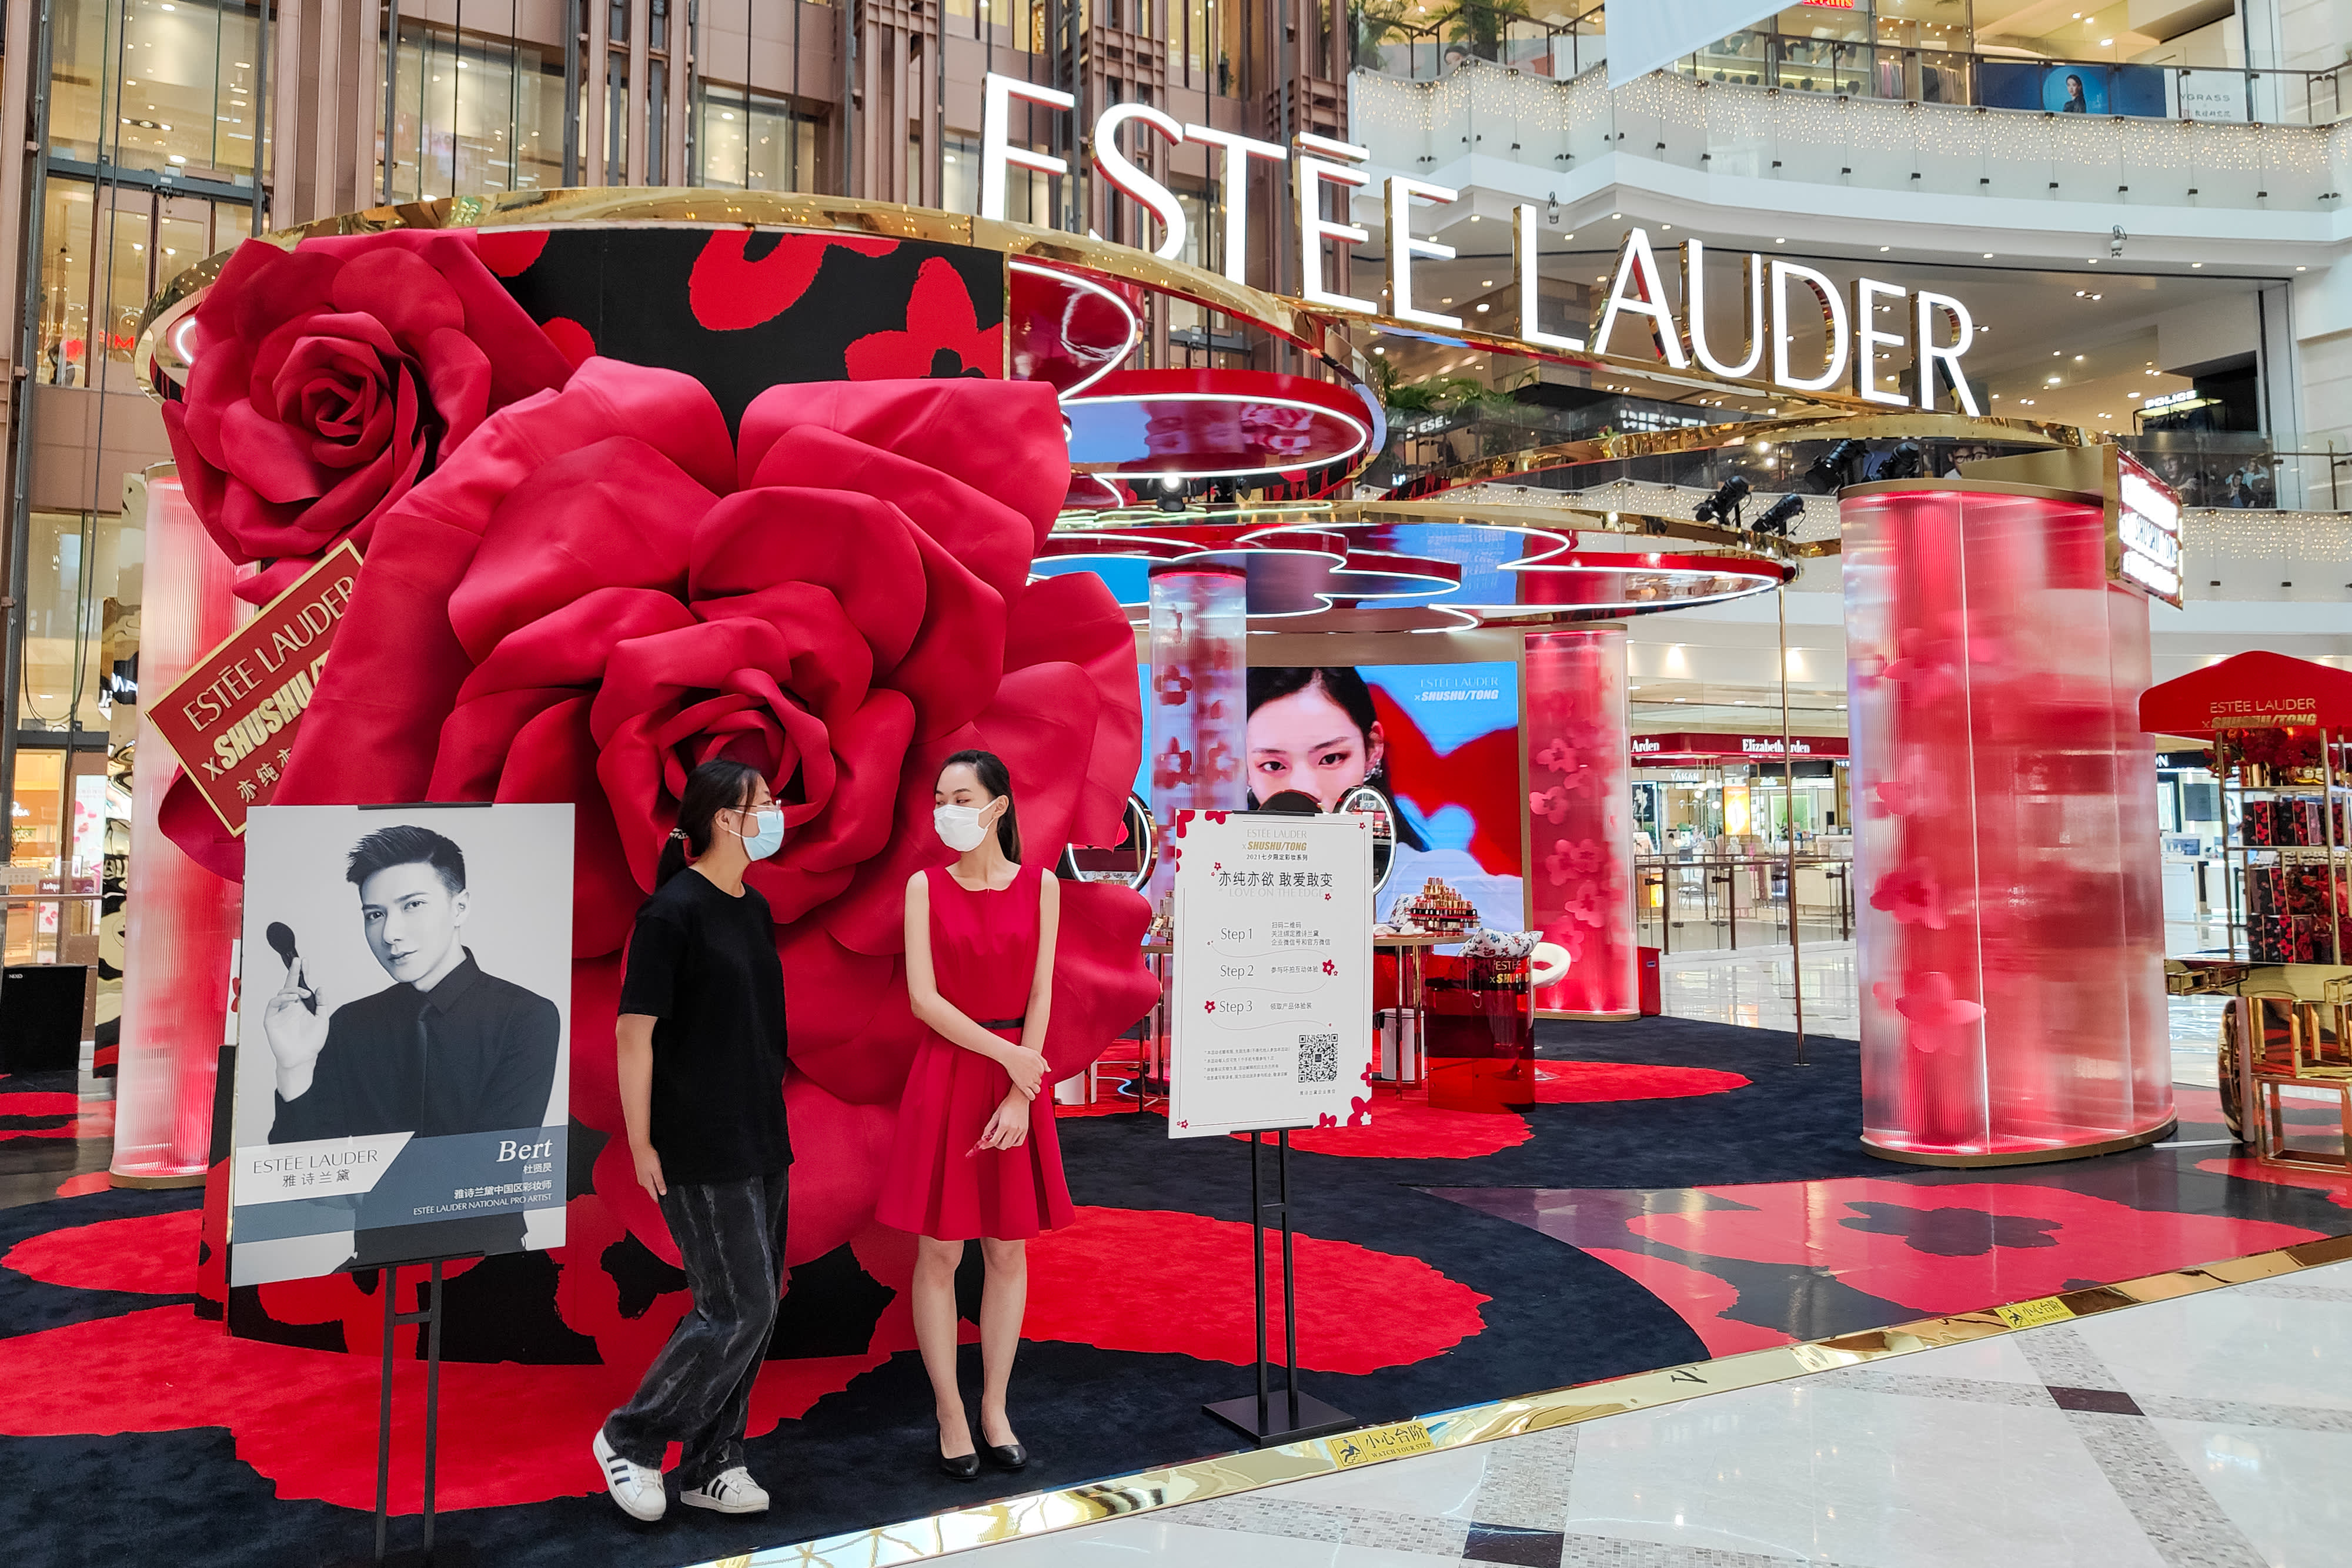 Thursday's sellers of Estee Lauder are missing the bigger picture